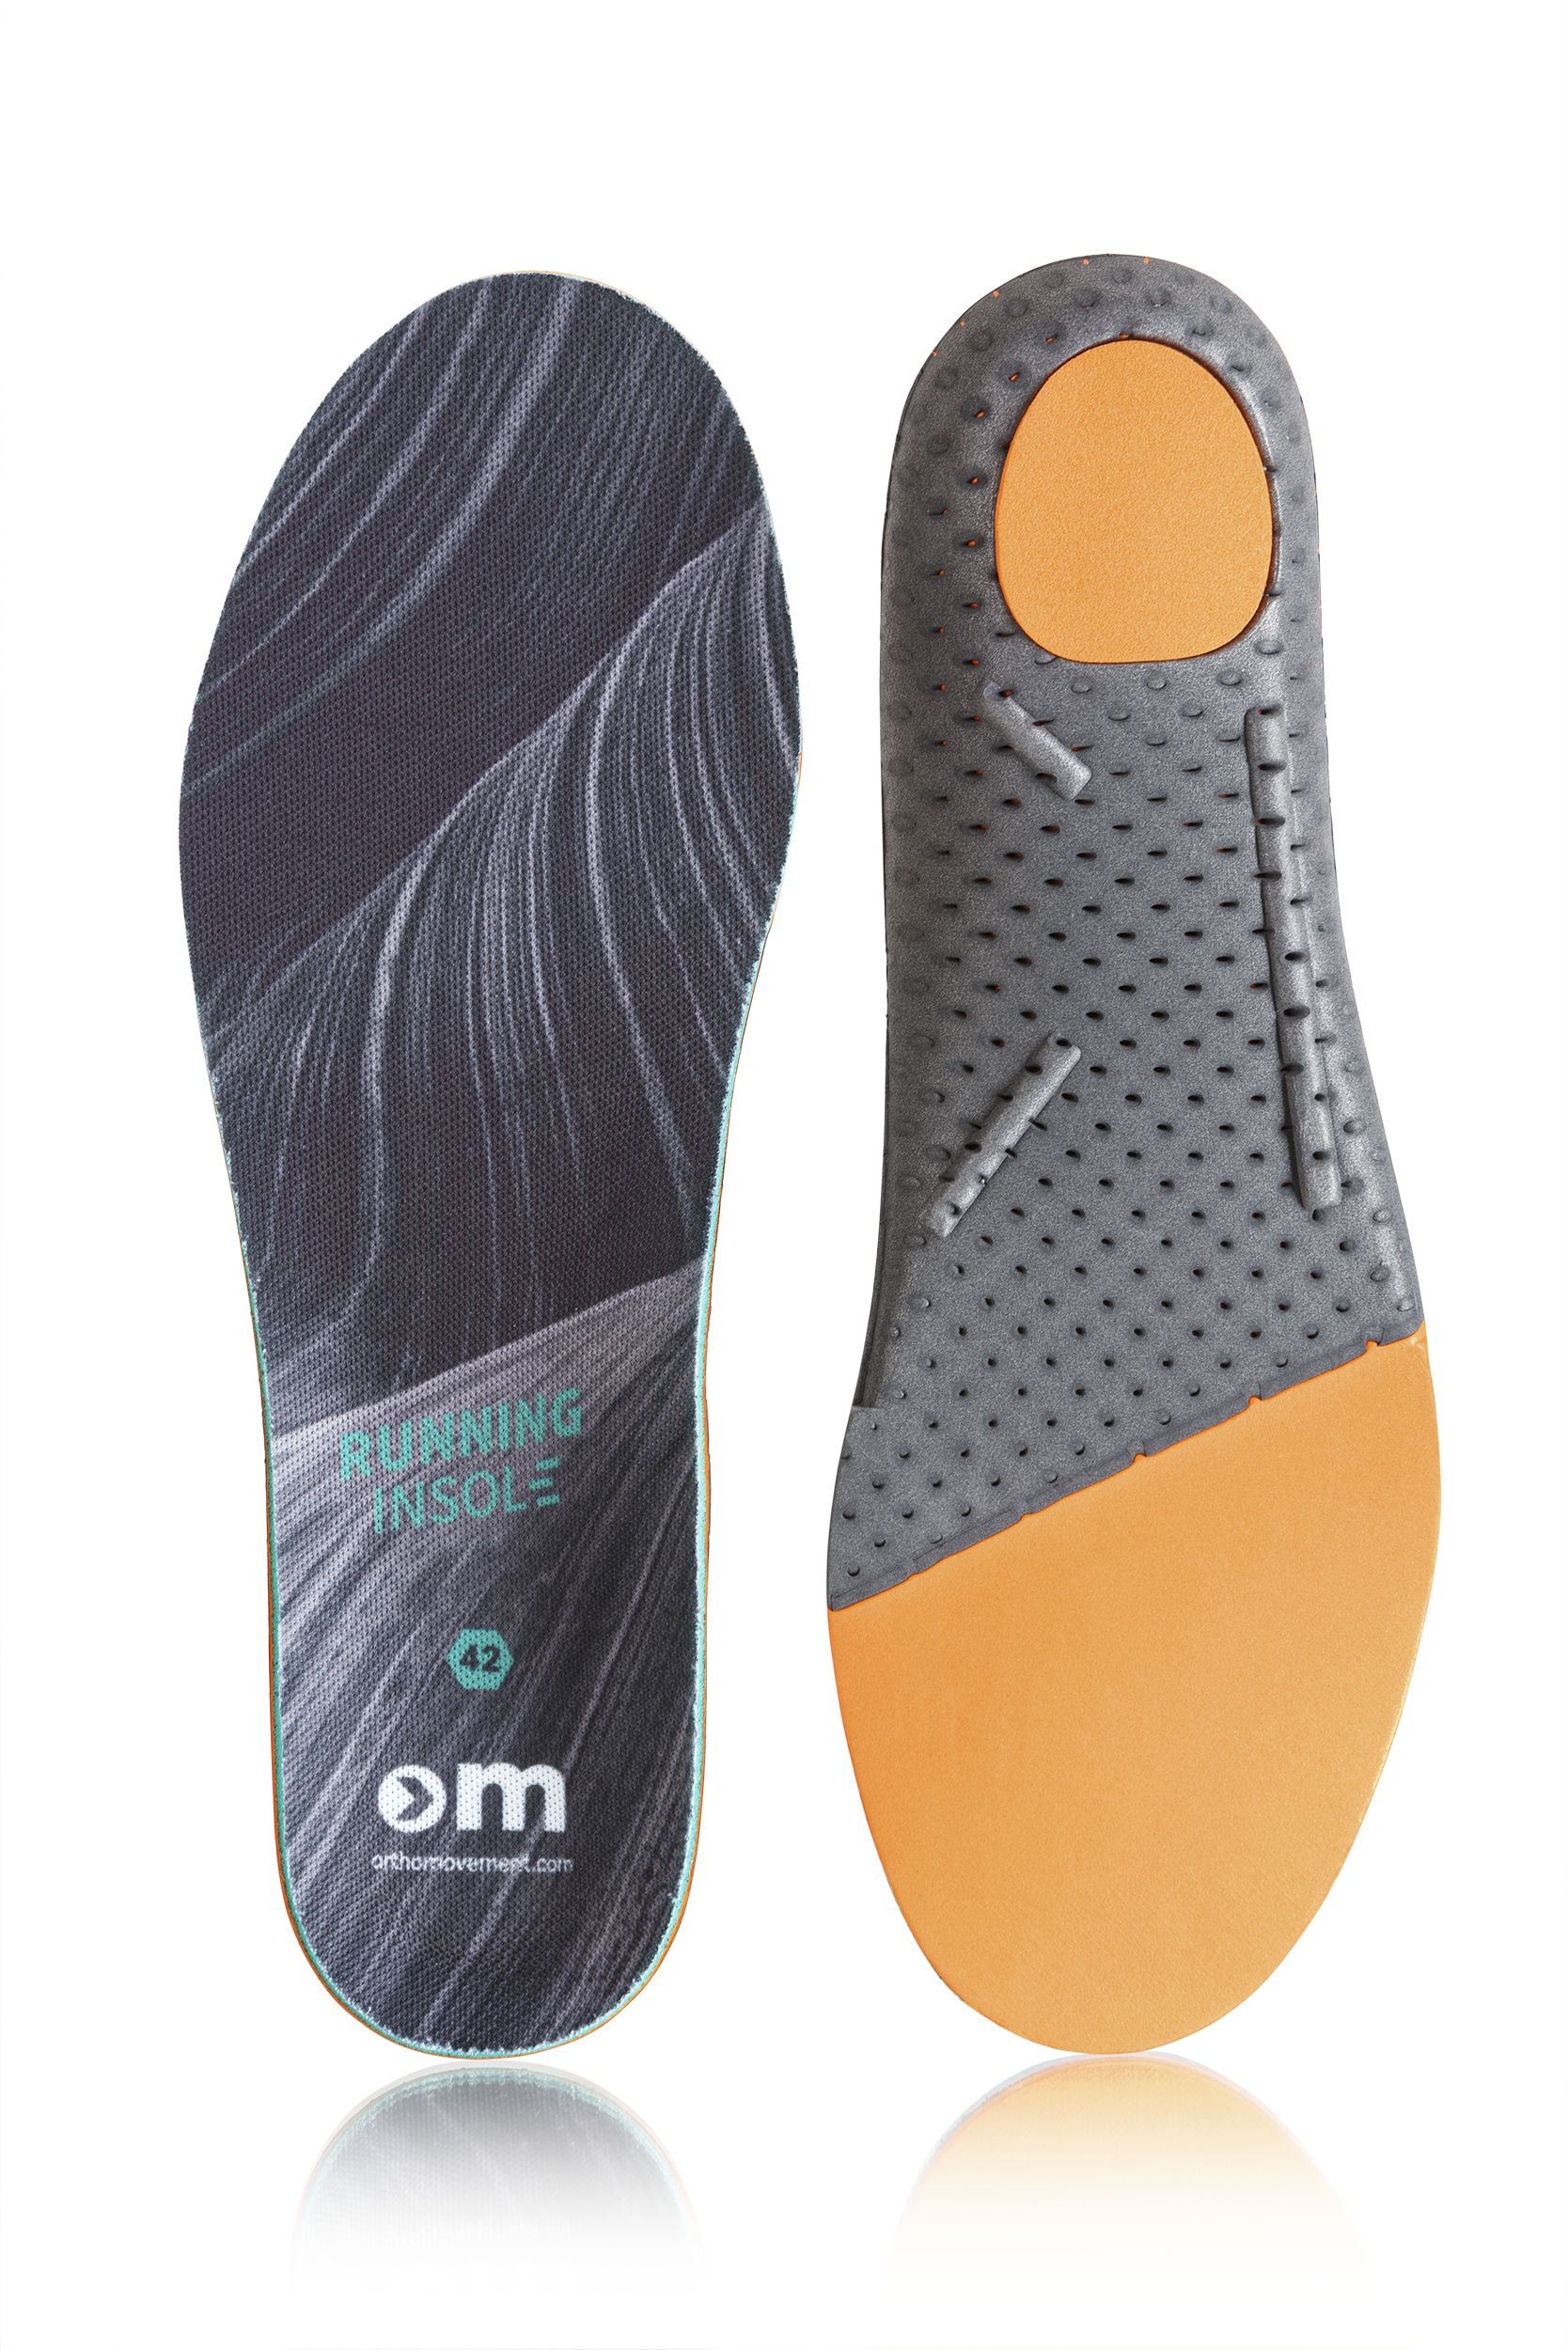 ORTHO MOVEMENT, RUNNING INSOLE